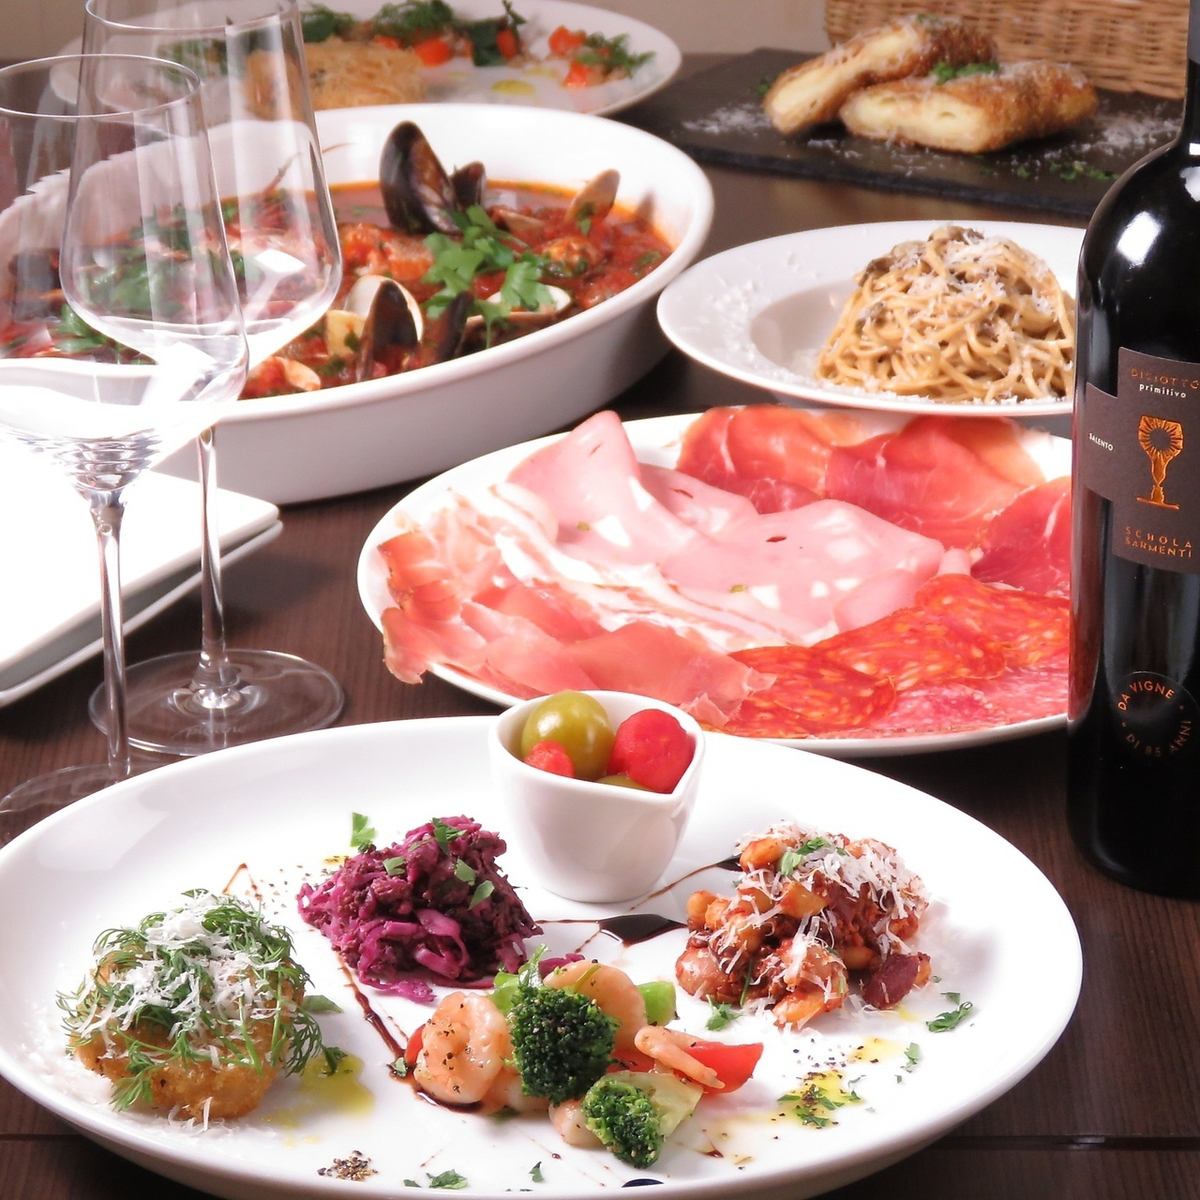 Casual Italian to enjoy side dishes and wine ♪